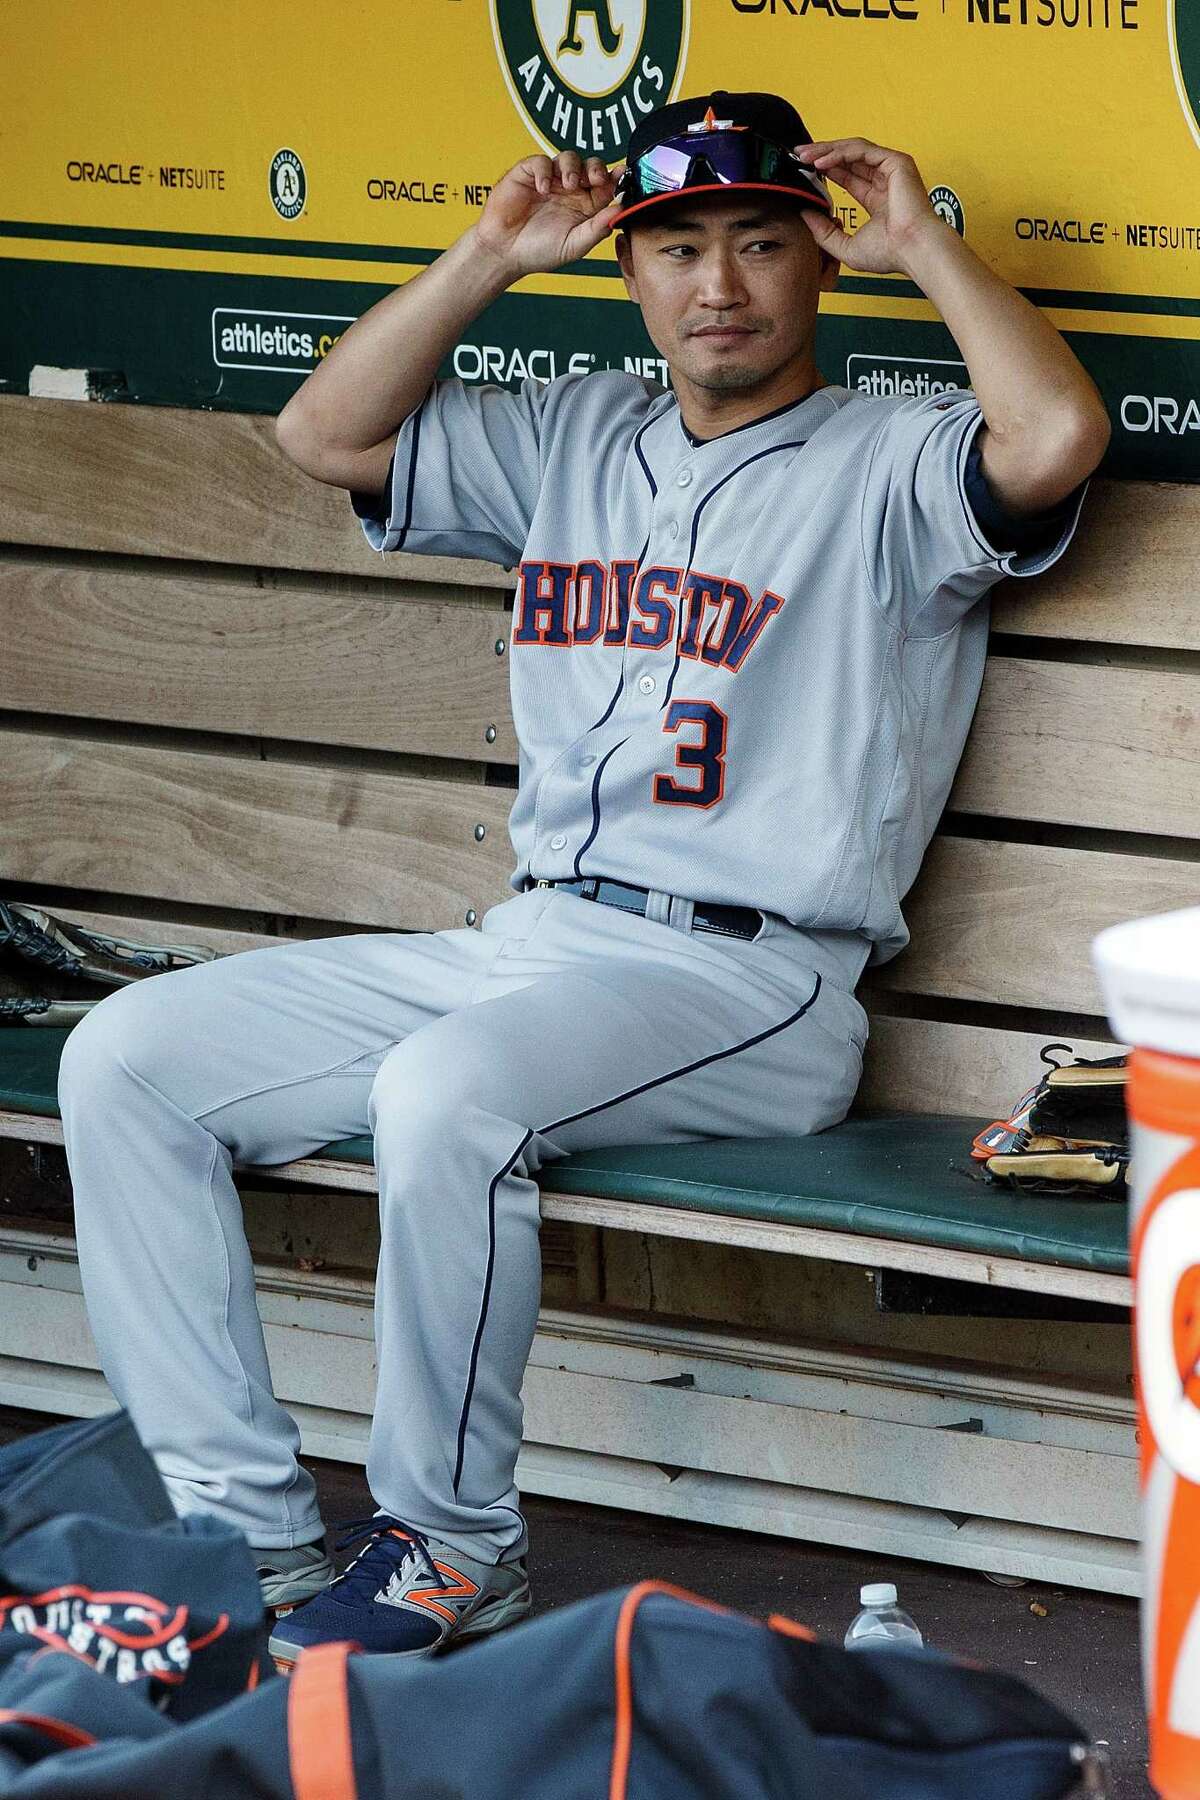 OAKLAND, CA - JUNE 19: Norichika Aoki #3 of the Houston Astros sits in the dugout before the game against the Oakland Athletics at the Oakland Coliseum on June 19, 2017 in Oakland, California.